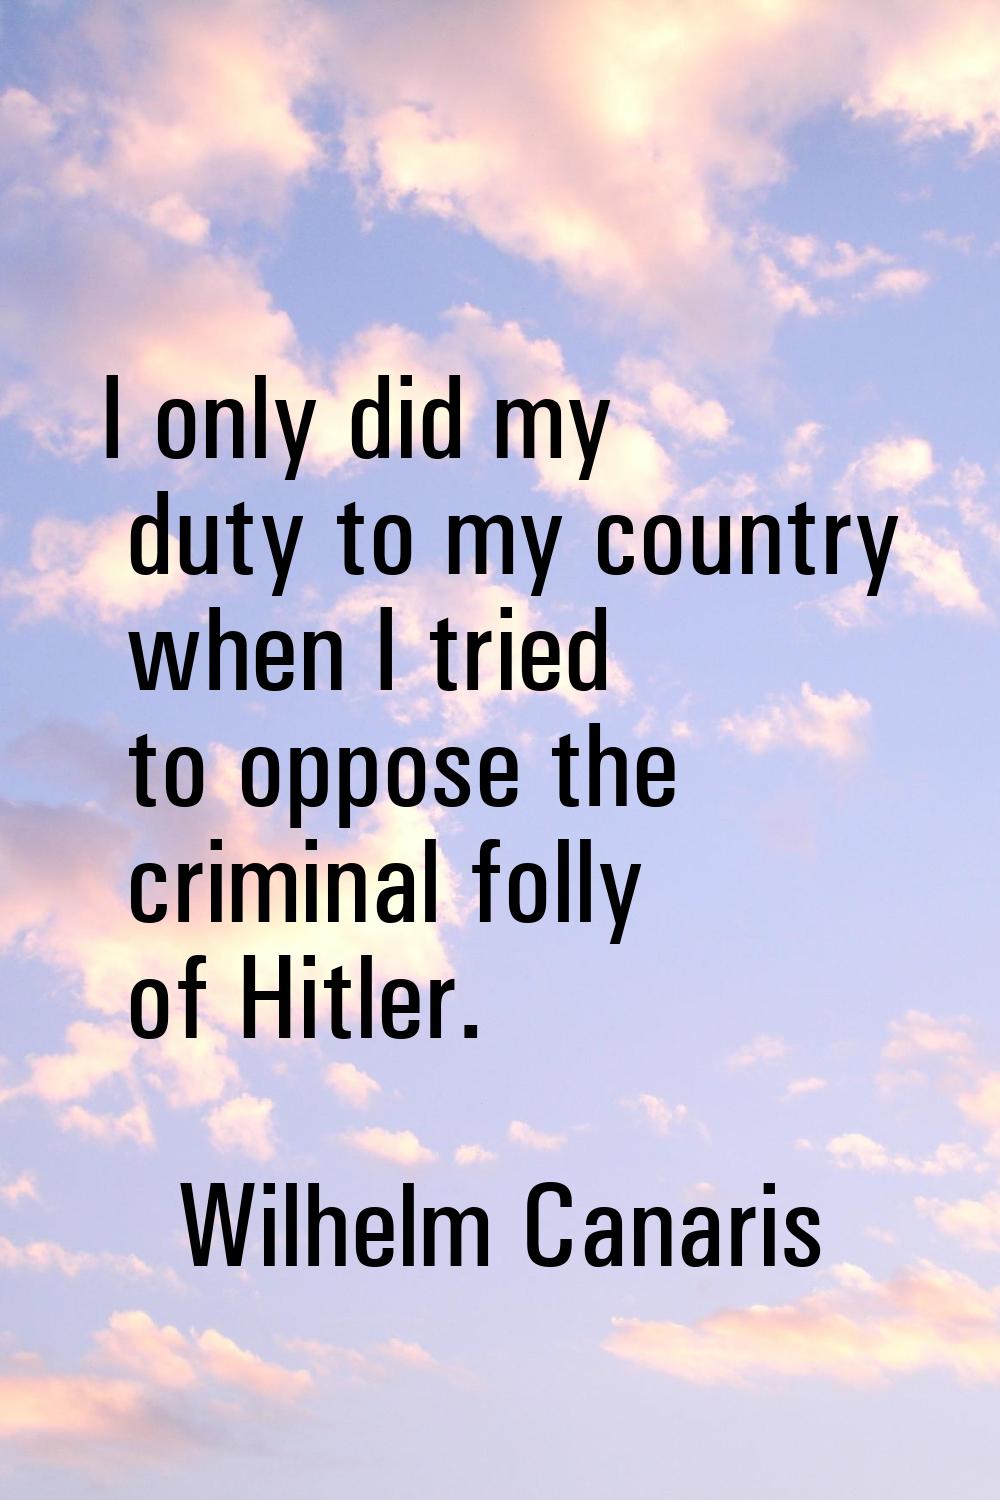 I only did my duty to my country when I tried to oppose the criminal folly of Hitler.